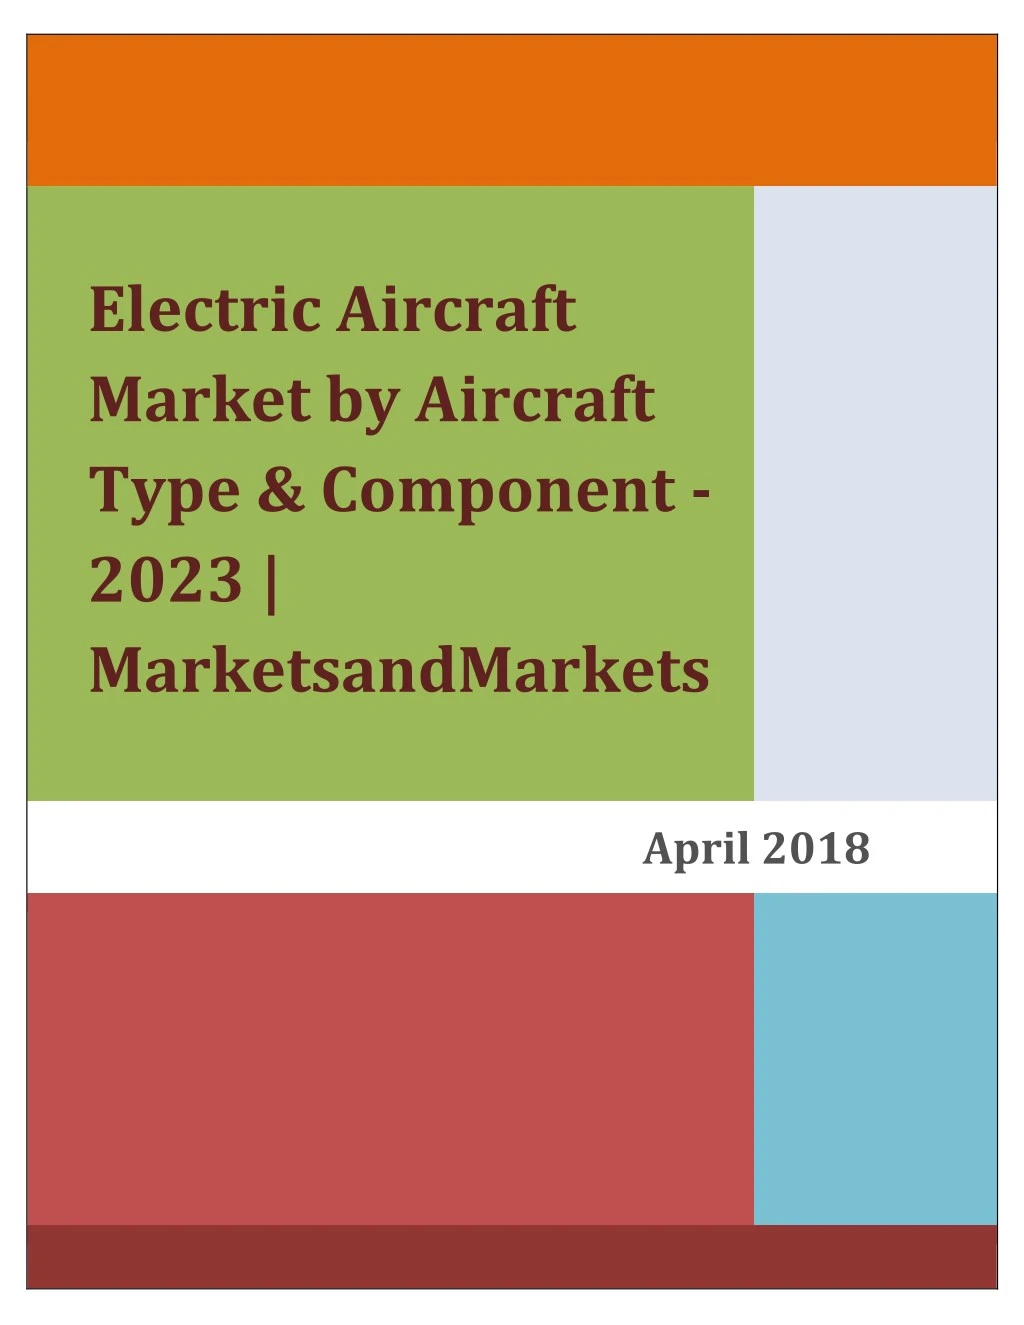 electric aircraft market by aircraft type